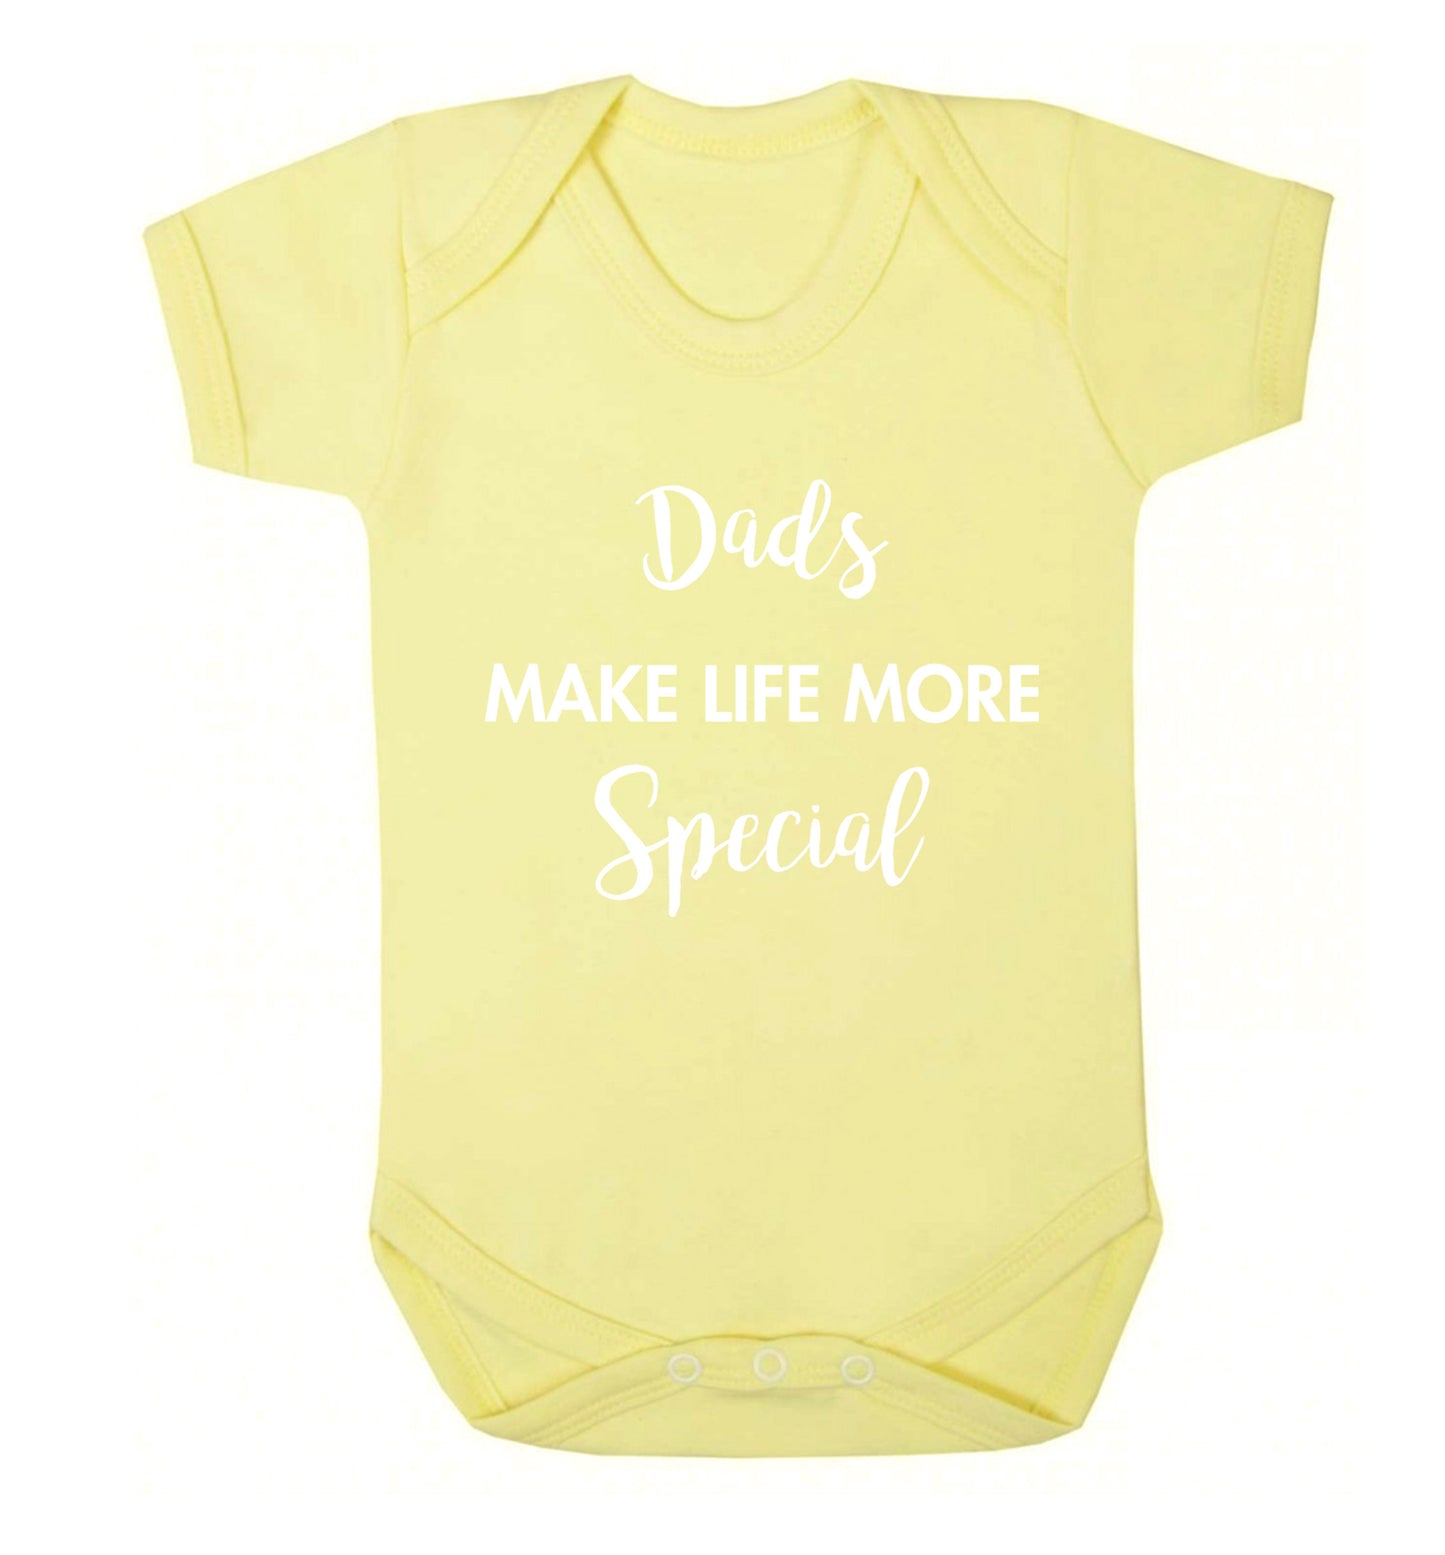 Dads make life more special Baby Vest pale yellow 18-24 months